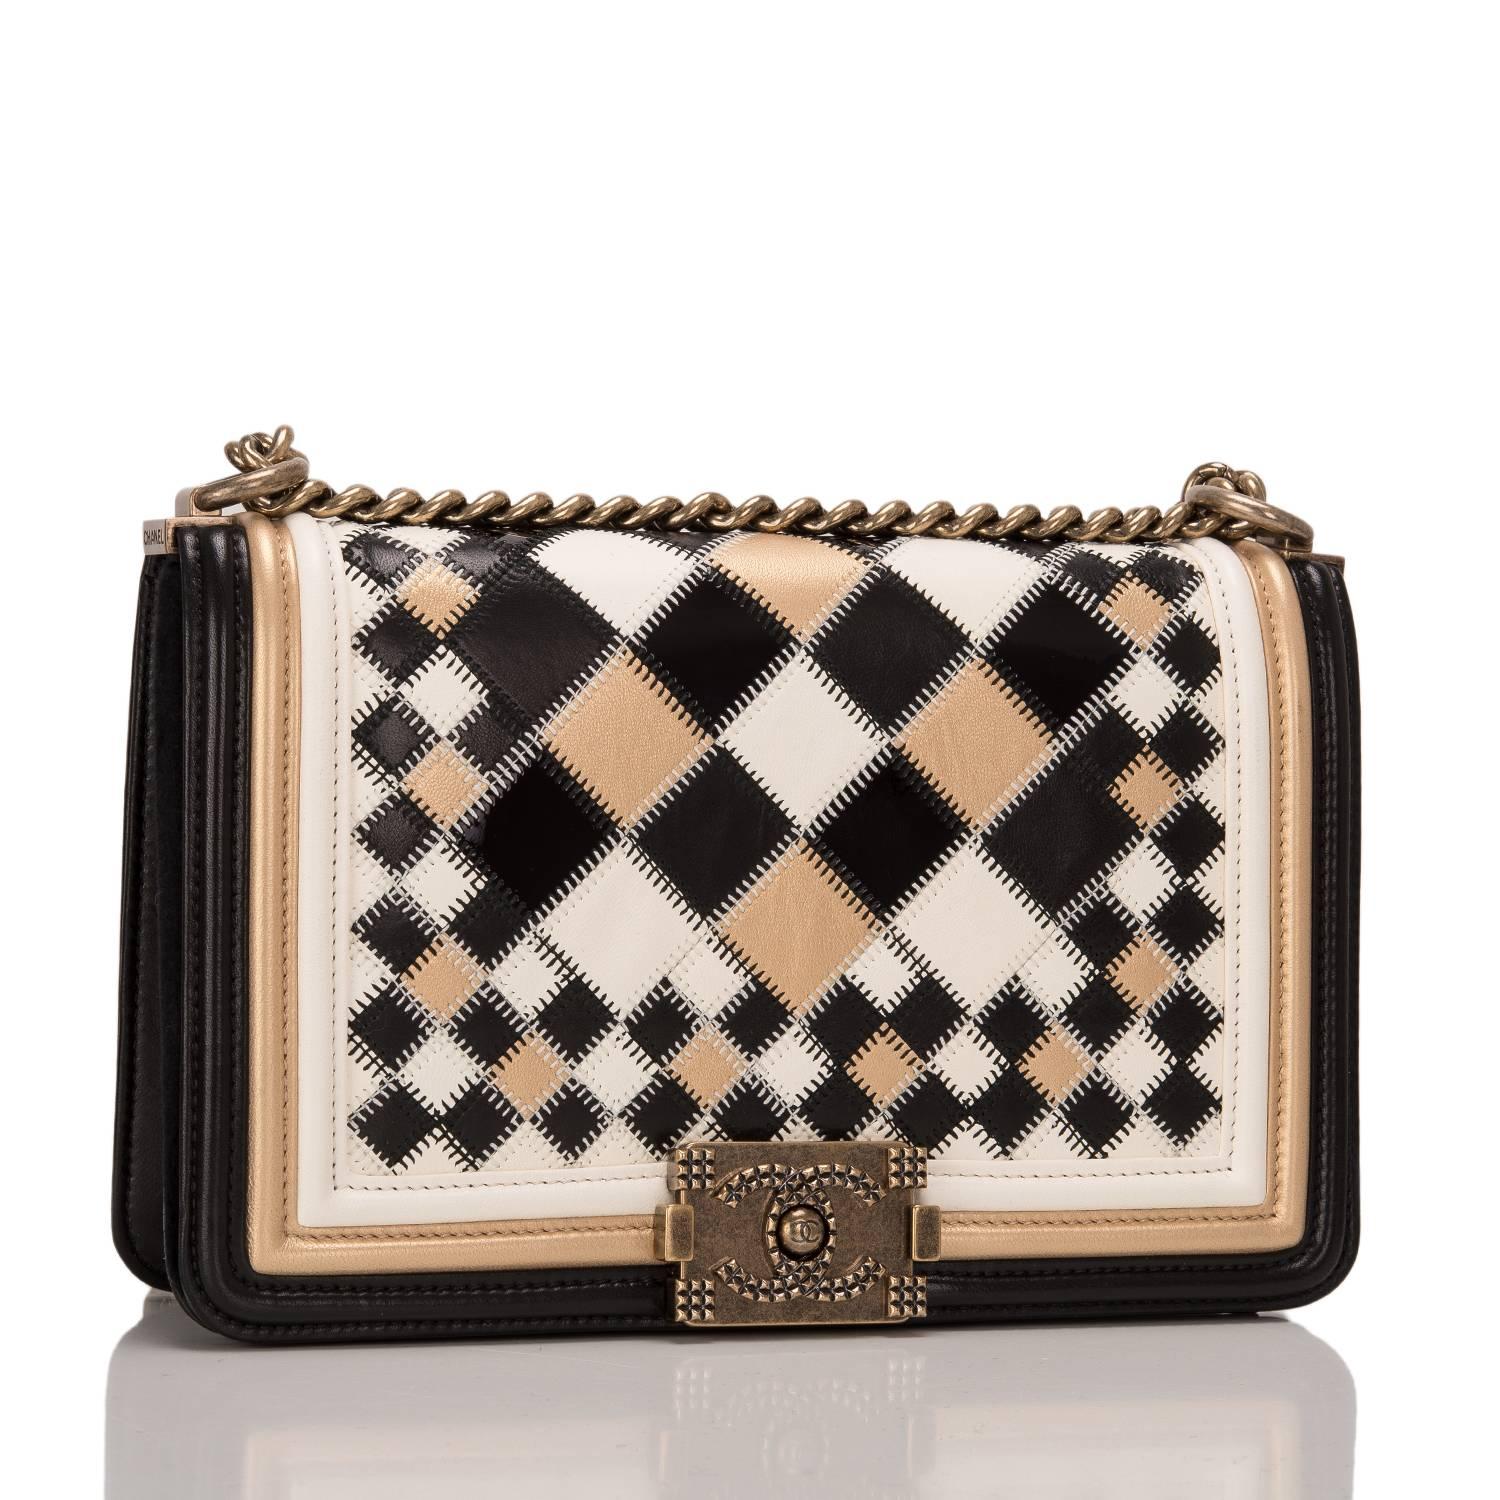 Chanel Metiers d'Art "Hall Of Mirrors" Medium Boy bag of black, white, and metallic gold lambskin leather with antique brass hardware.

This rare, collectible bag from the famed Versailles collection features a full front flap with